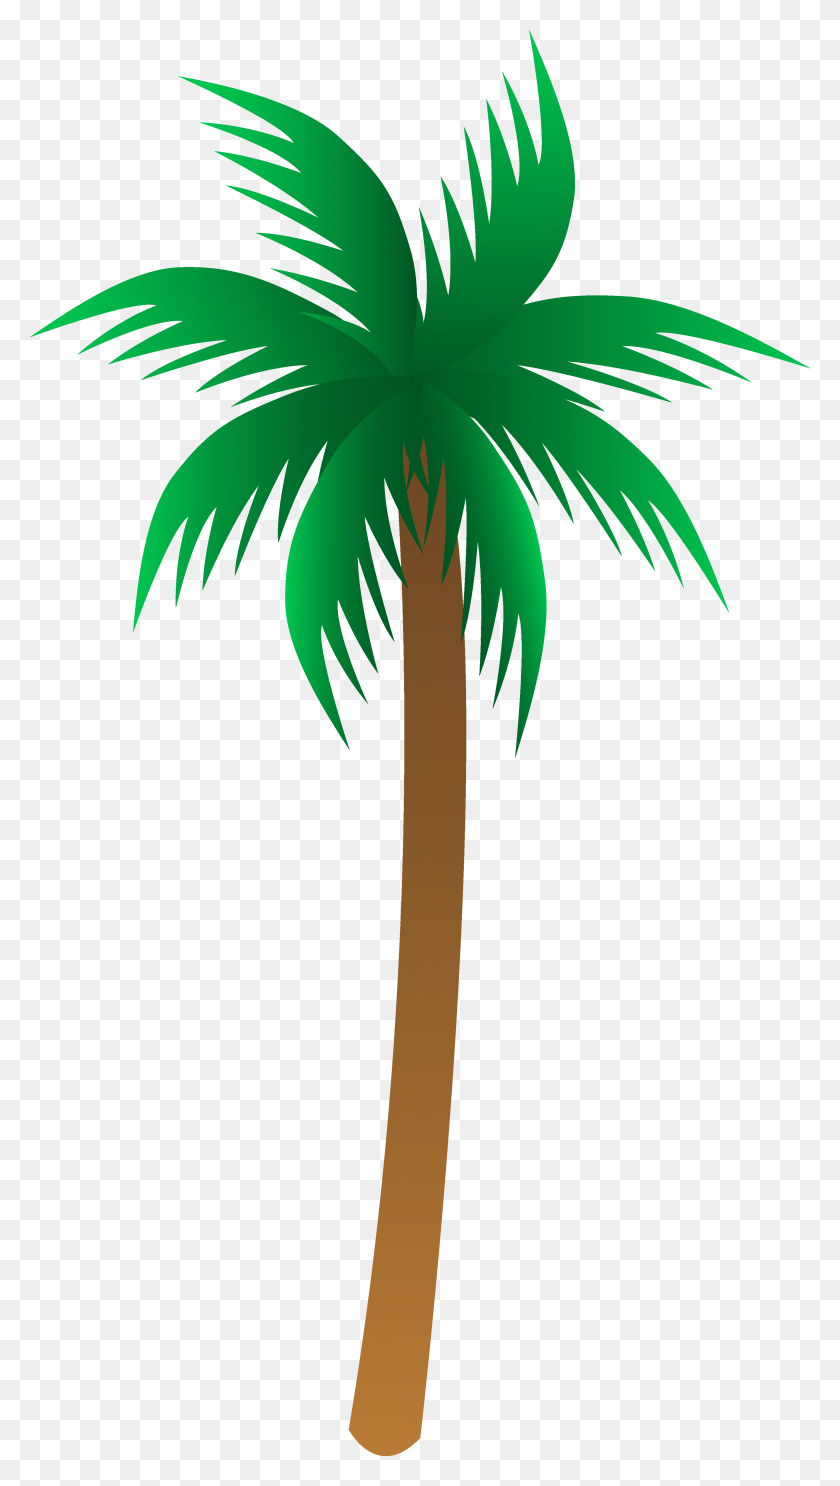 3182x5819 Simple Palm Tree Vector Free Clipart Free Image - Tree Vector PNG